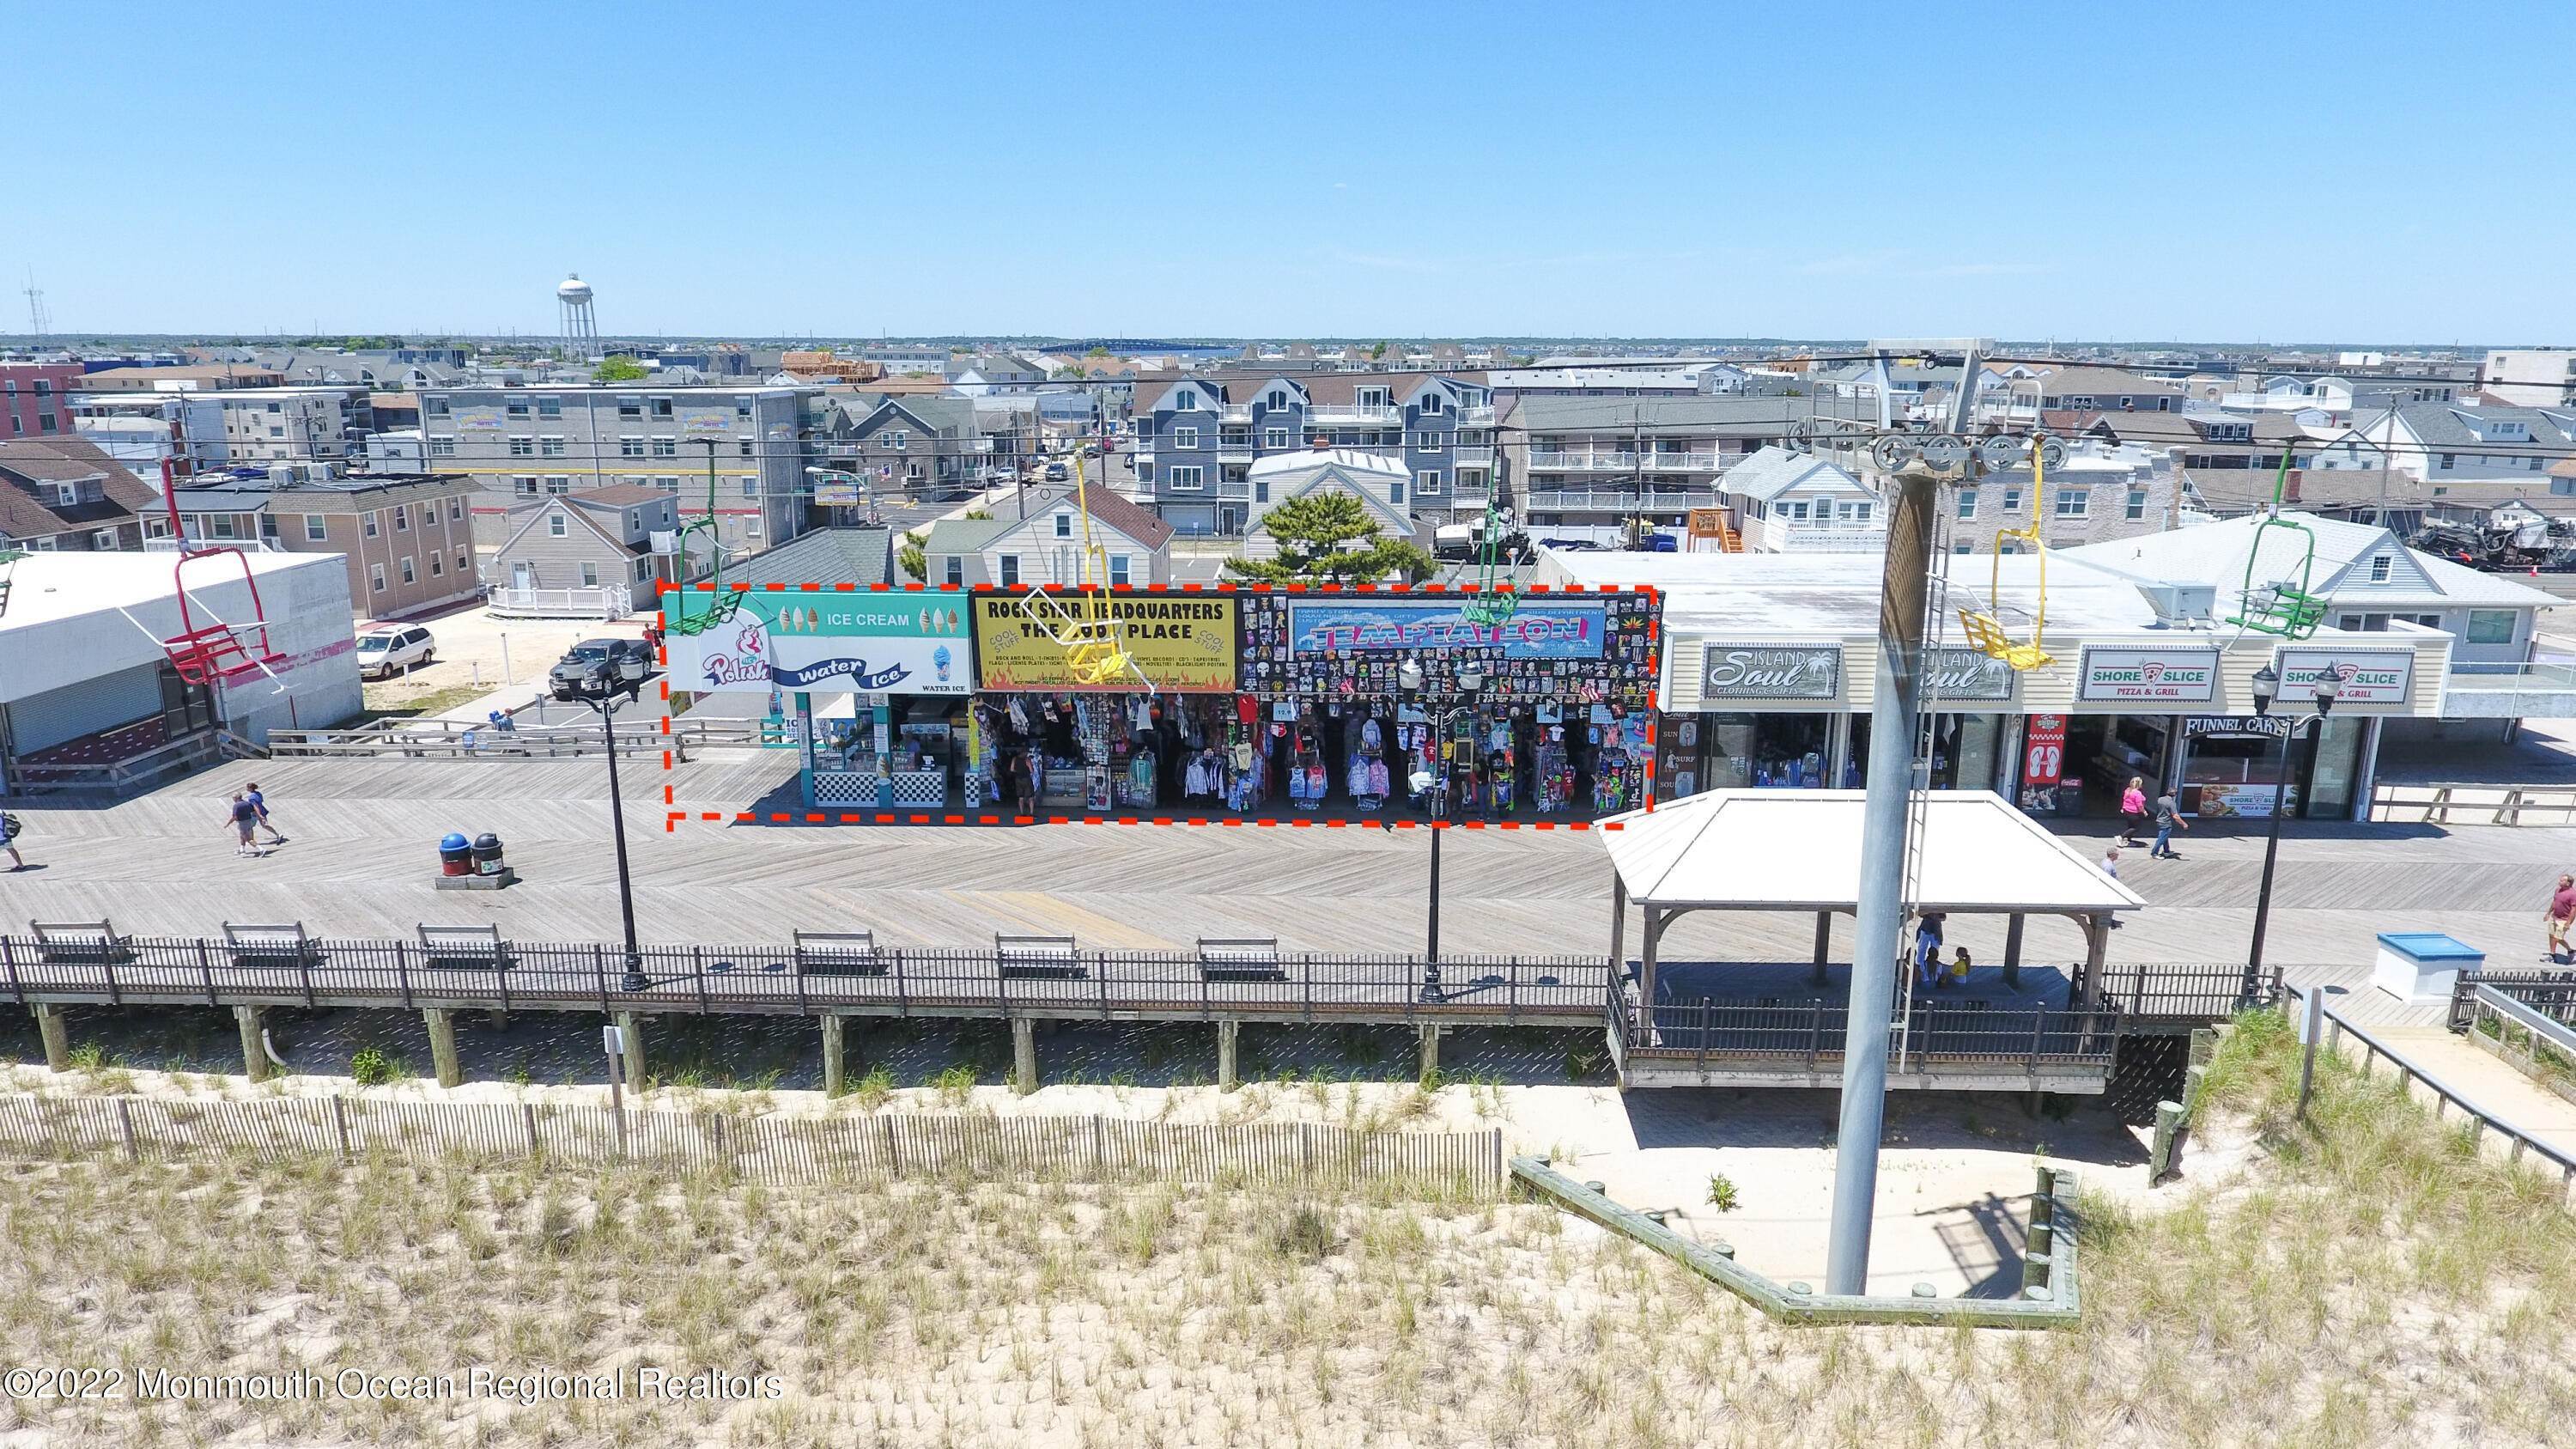 Property for Sale at 1301 Boardwalk Seaside Heights, New Jersey 08751 United States